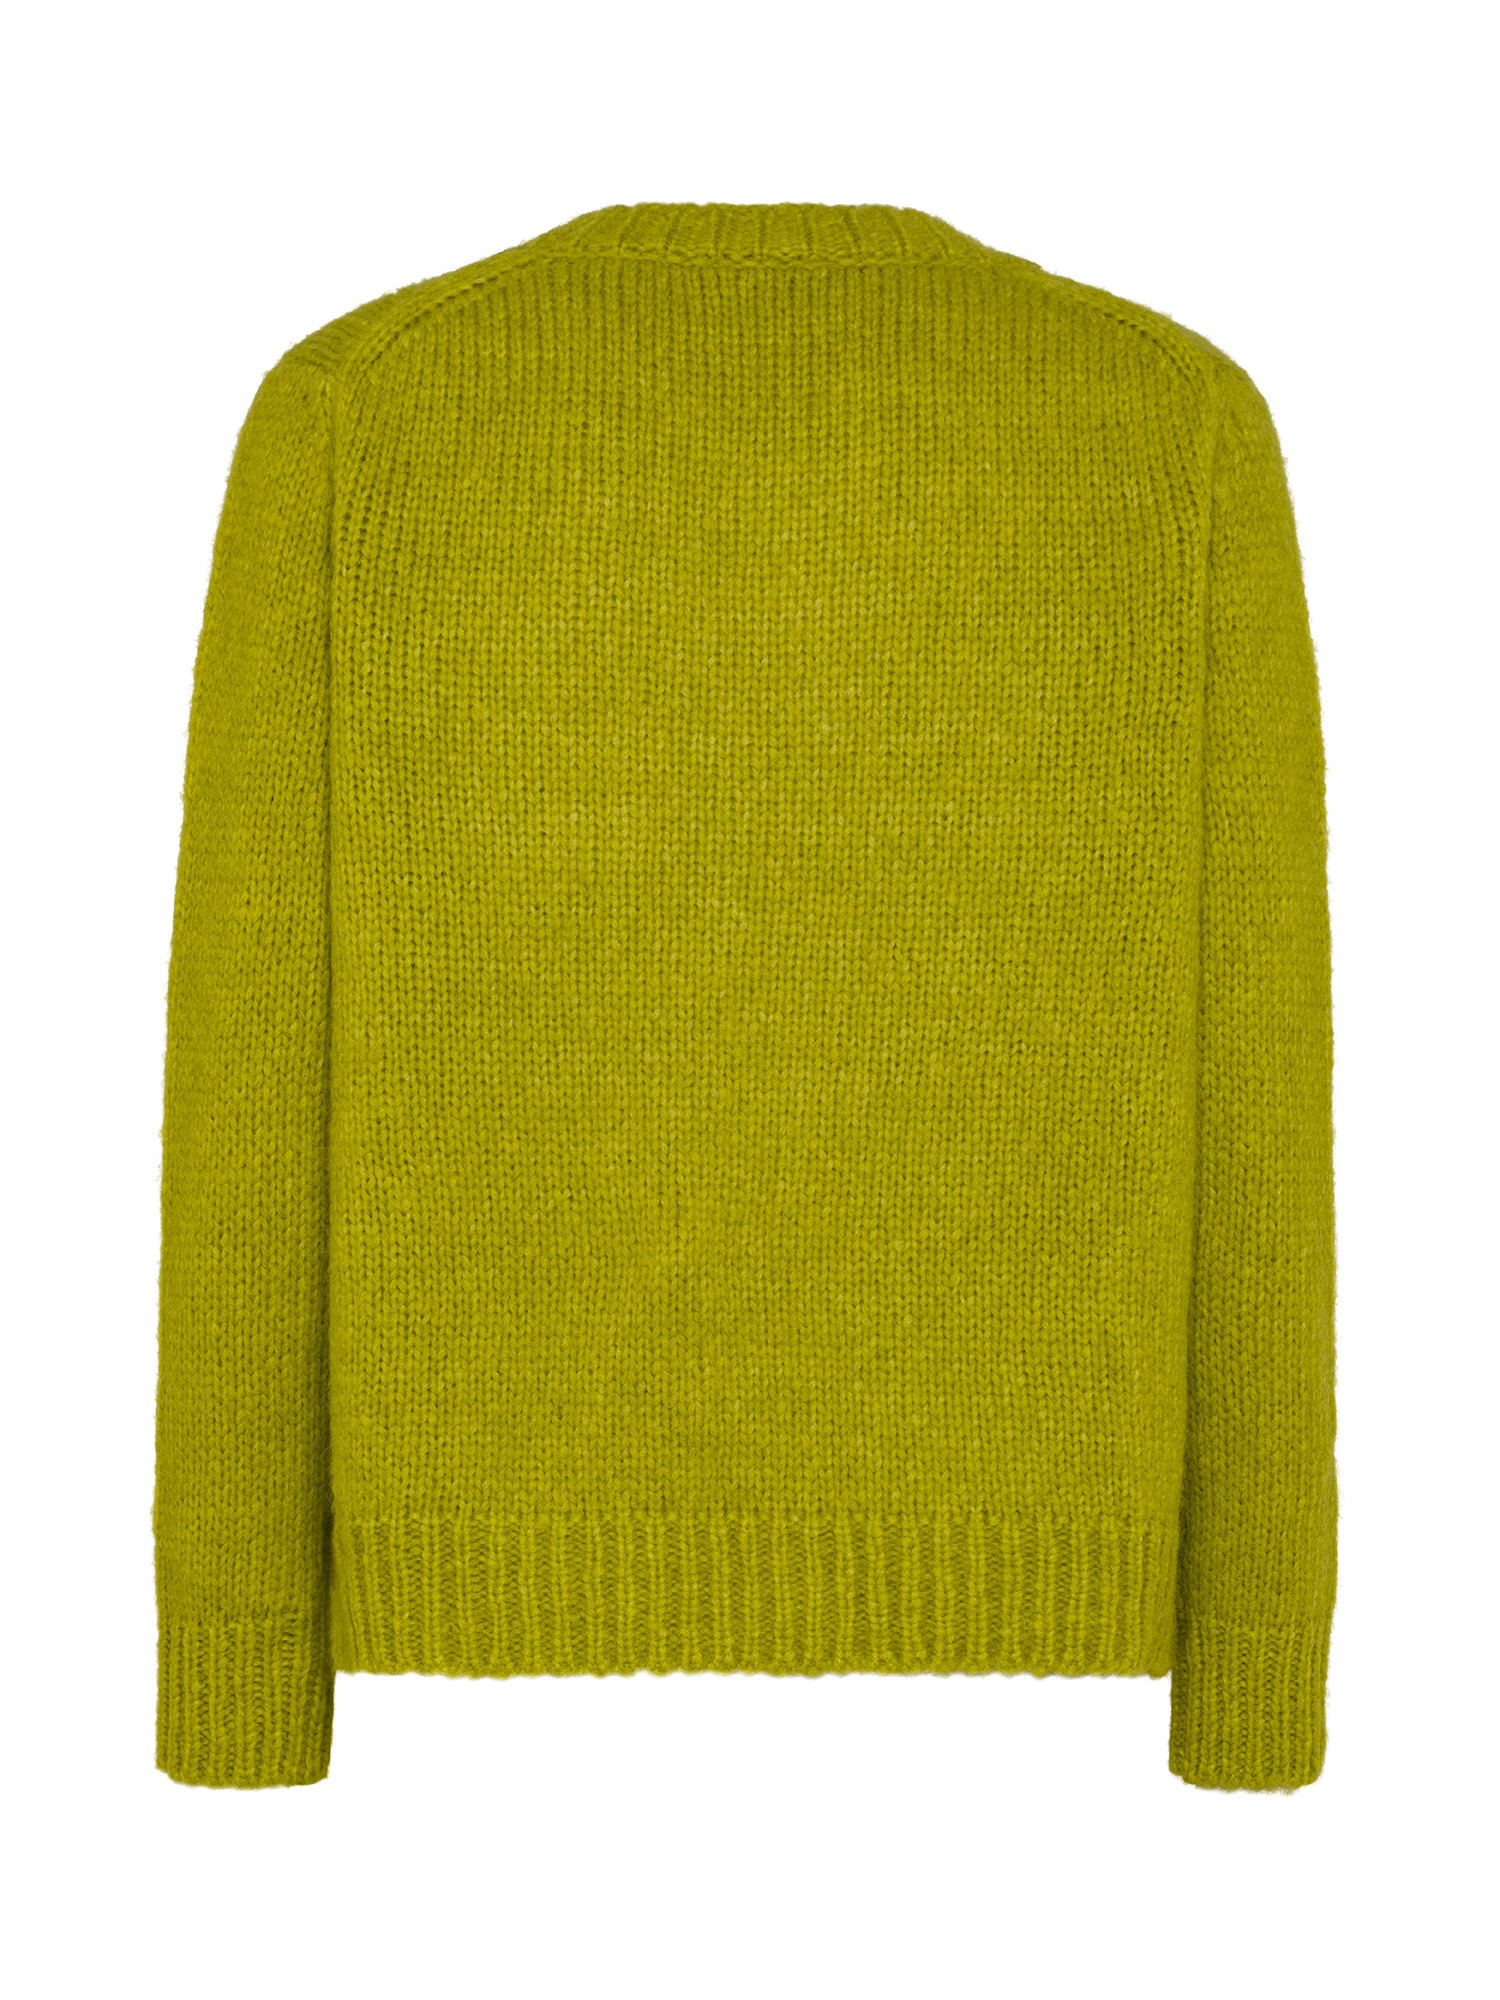 K Collection - Crewneck sweater, Green Apple, large image number 1